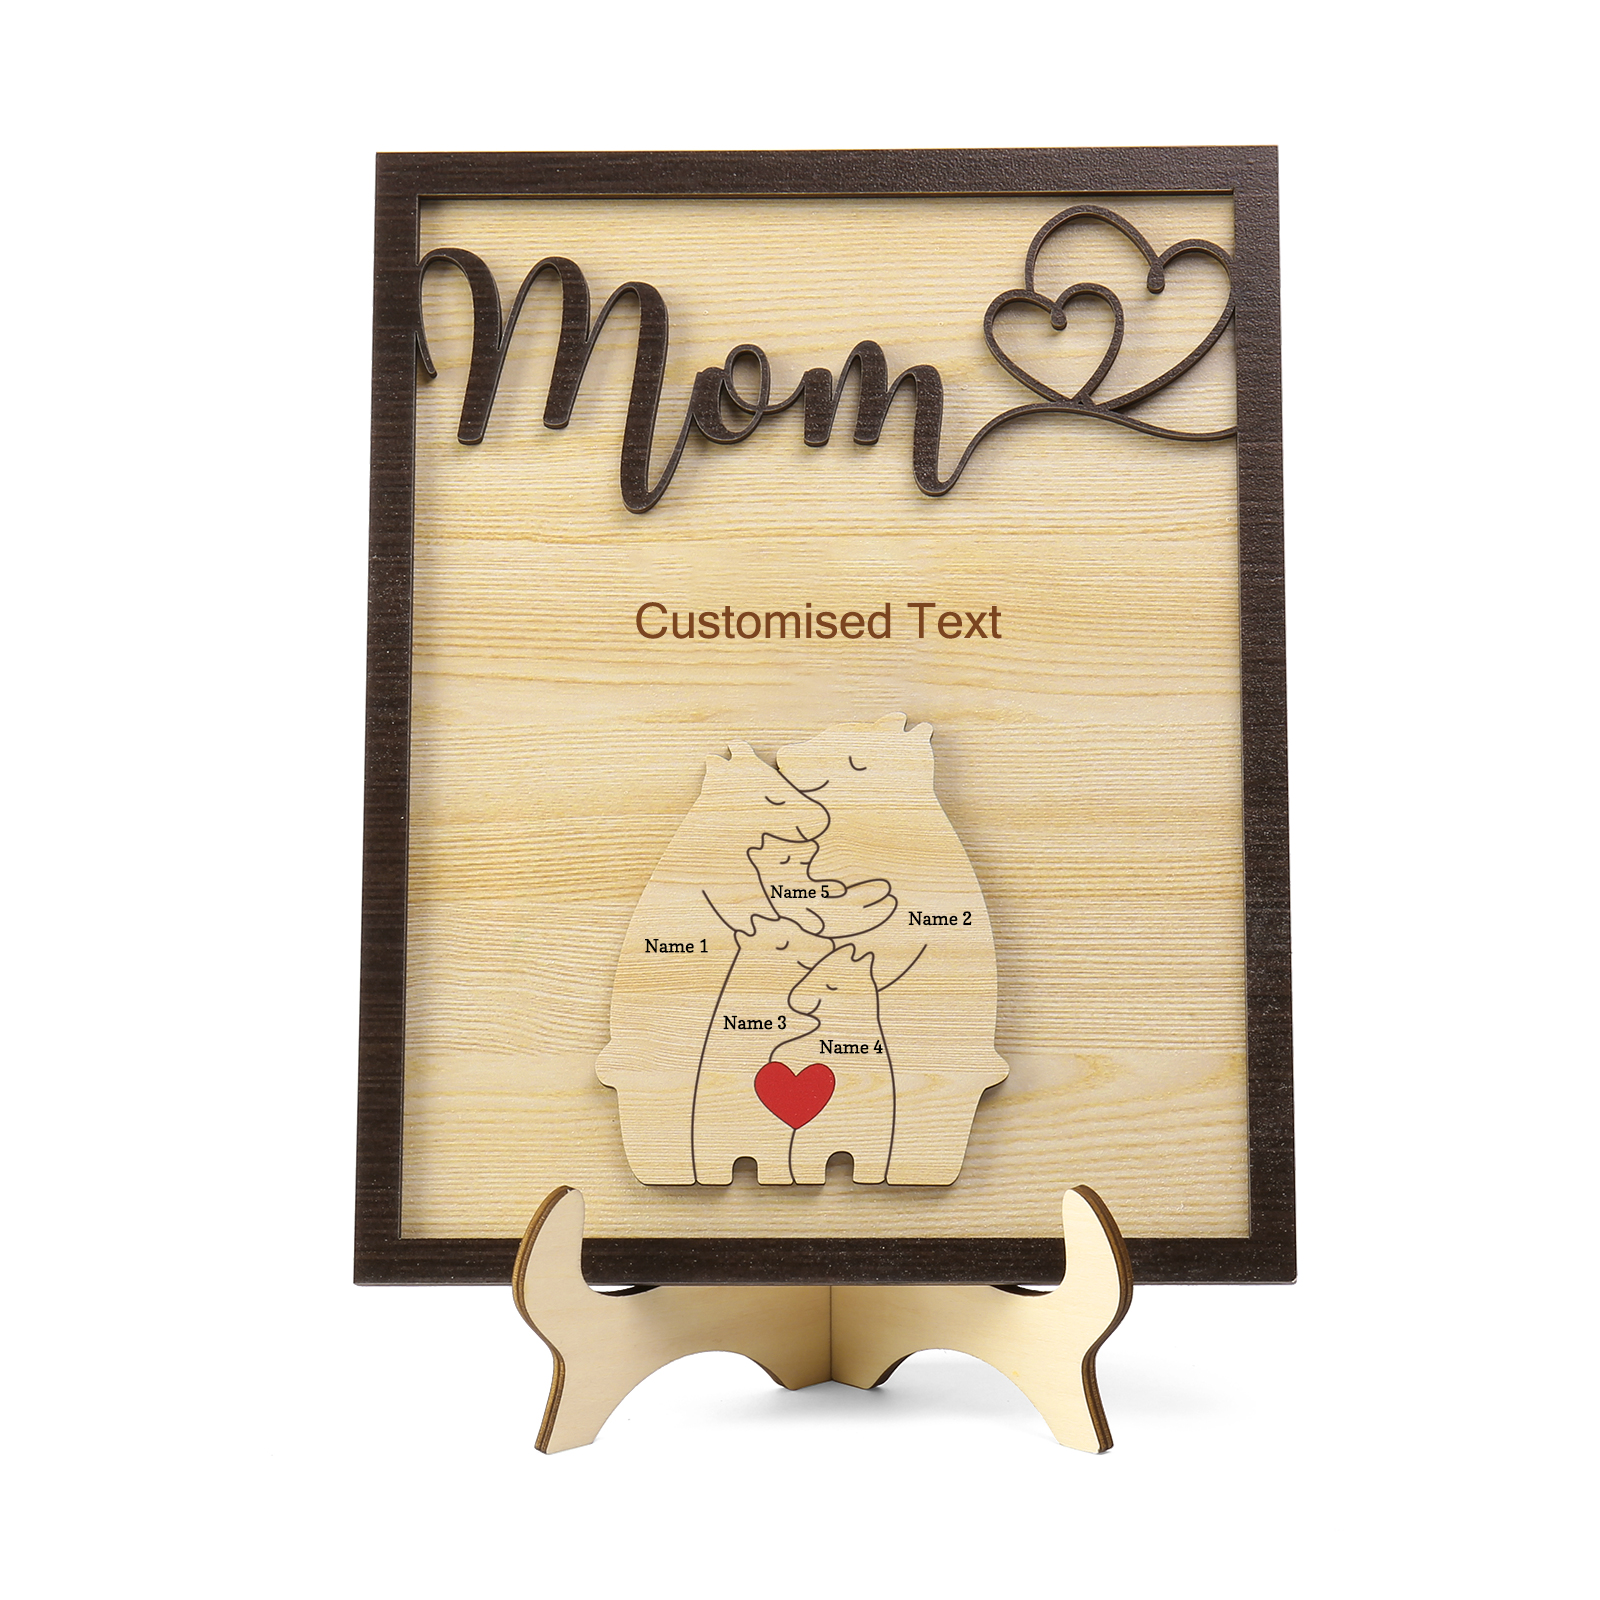 5 Names - Personalized Home Frame Wooden Ornaments Cute Bear Style Customizable 2 Text Ornaments For Mom